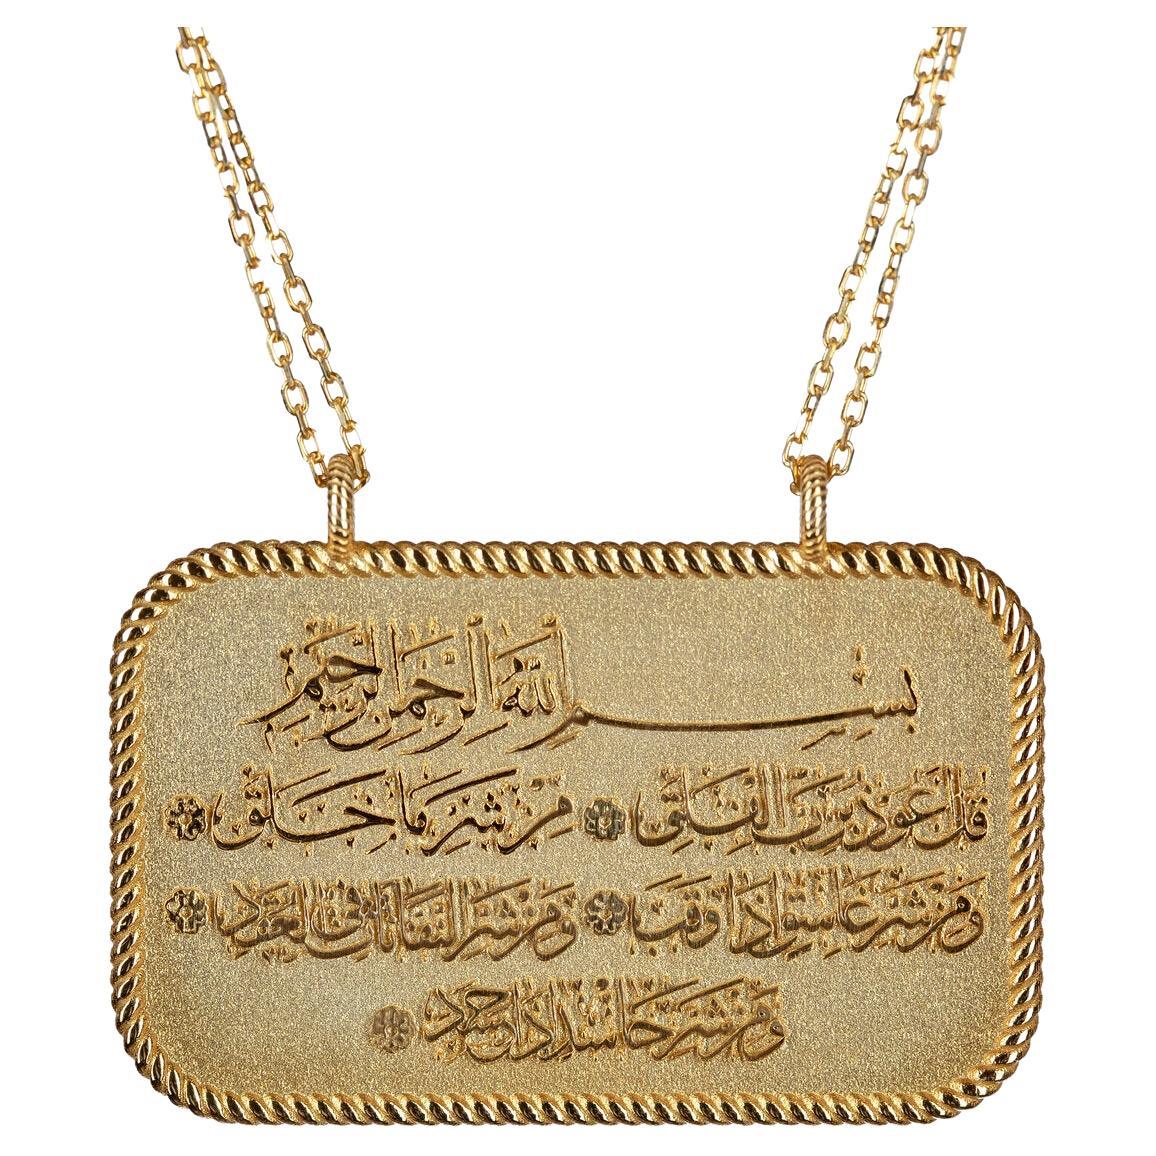 A charming 18K gold necklace with exquisite Arabic calligraphy engraving of Surah Al Falaq (The Daybreak), a chapter of the Qur'an that is read to offer protection and ward off evil. The Surat al Falaq necklace expresses a firm belief in the